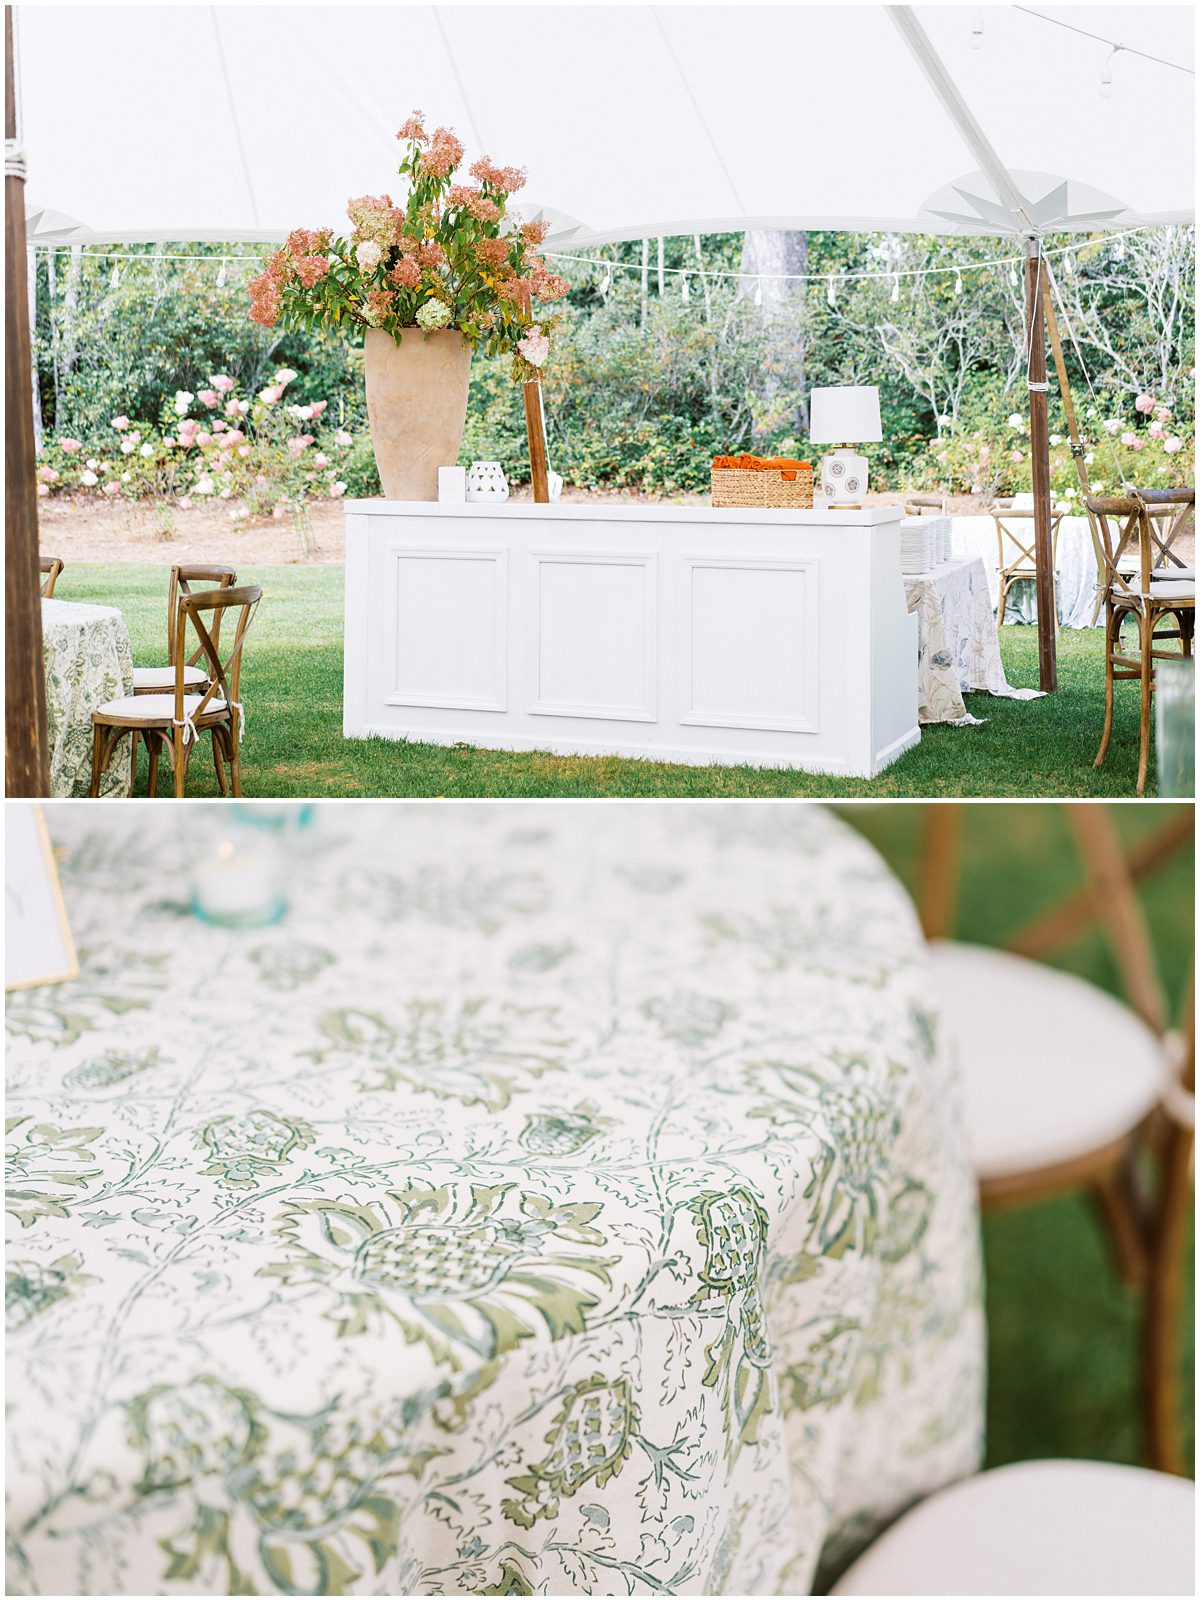 Tented wedding reception decor inspiration of a white bar with a giant ceramic vase filled with flowers and tables with luxurious patterned linens with green floral design